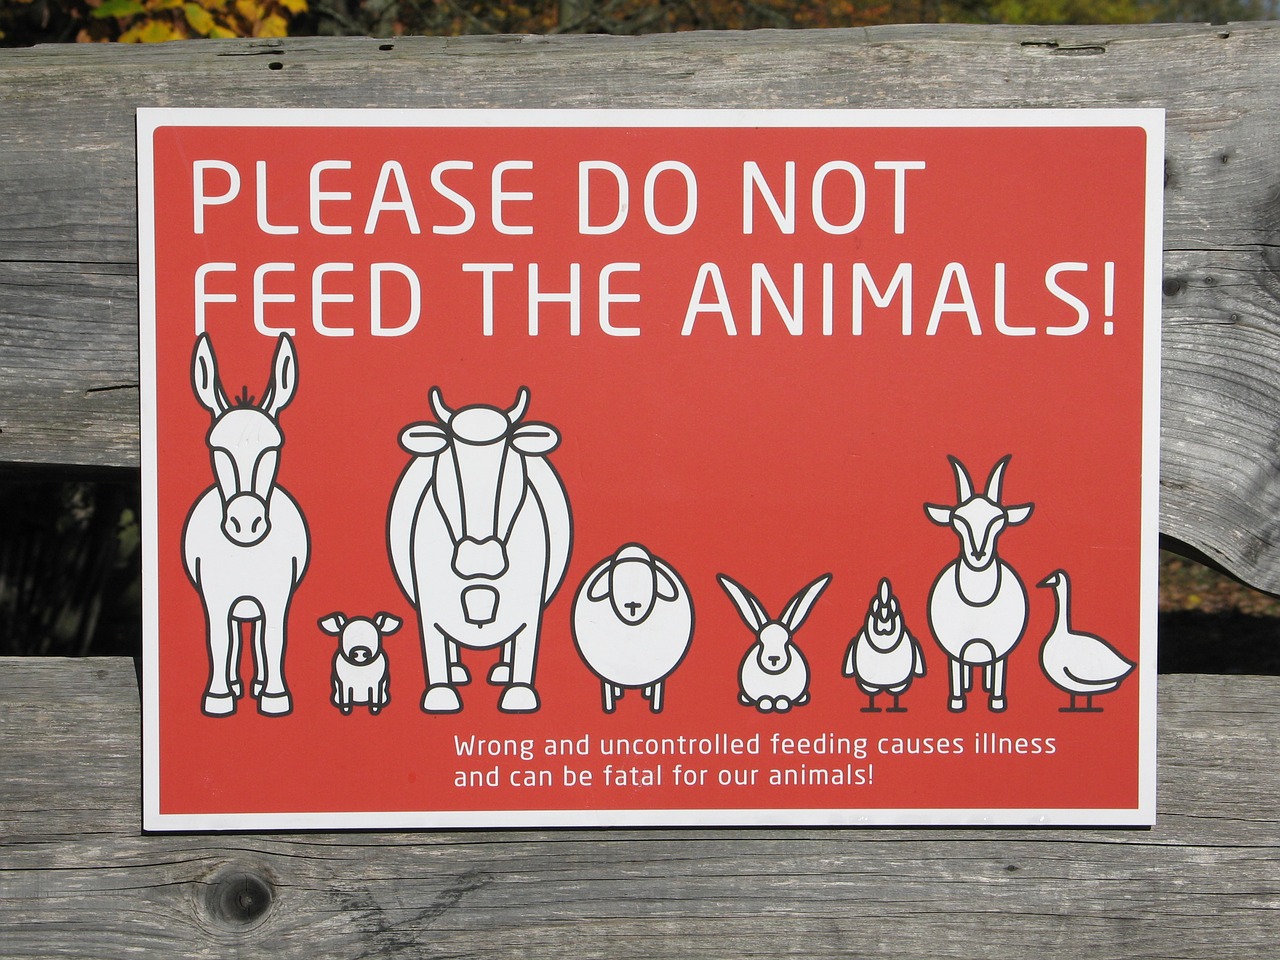 Please do not disclose. Please do not Feed the animals знак. Животных не кормить табличка. Животных не кормить. Don’t Feed the animals.